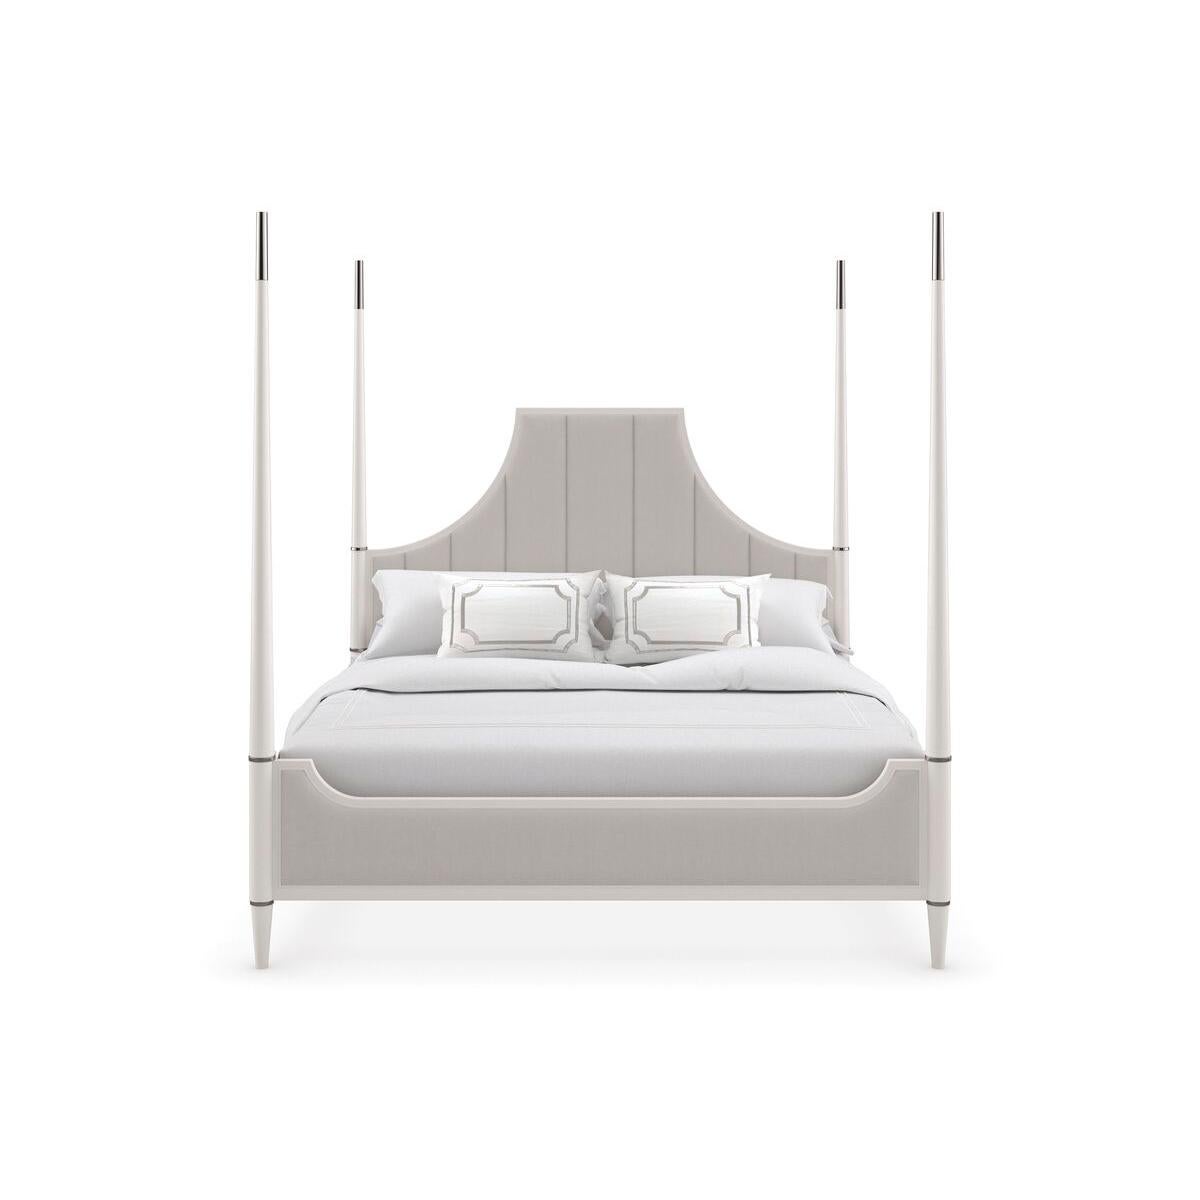 With a traditional overtone, this classic bed offers an elegant and stately design that showcases a sophisticated blend of modern and classic elements. The bed features a unique, high-backed canopy-style headboard, which curves inward, creating an